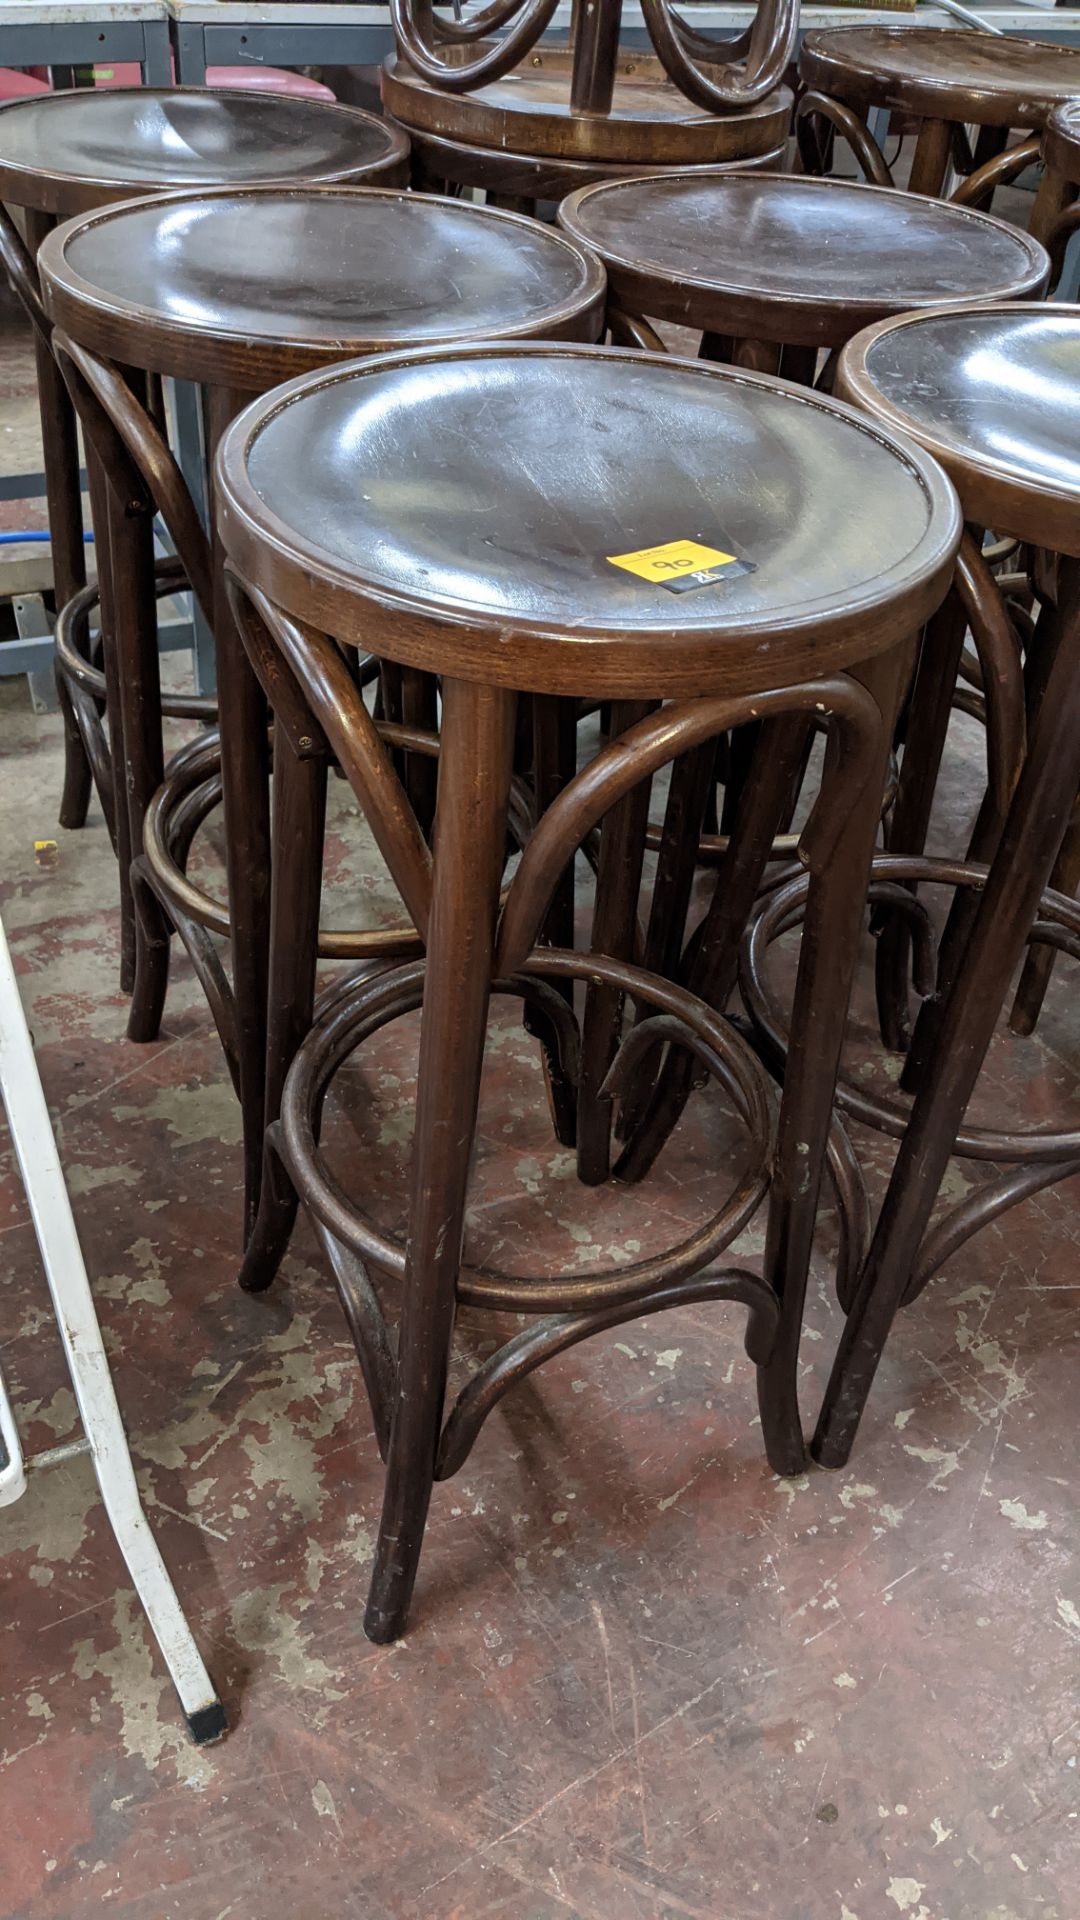 7 off matching wooden bar stools - Image 3 of 3